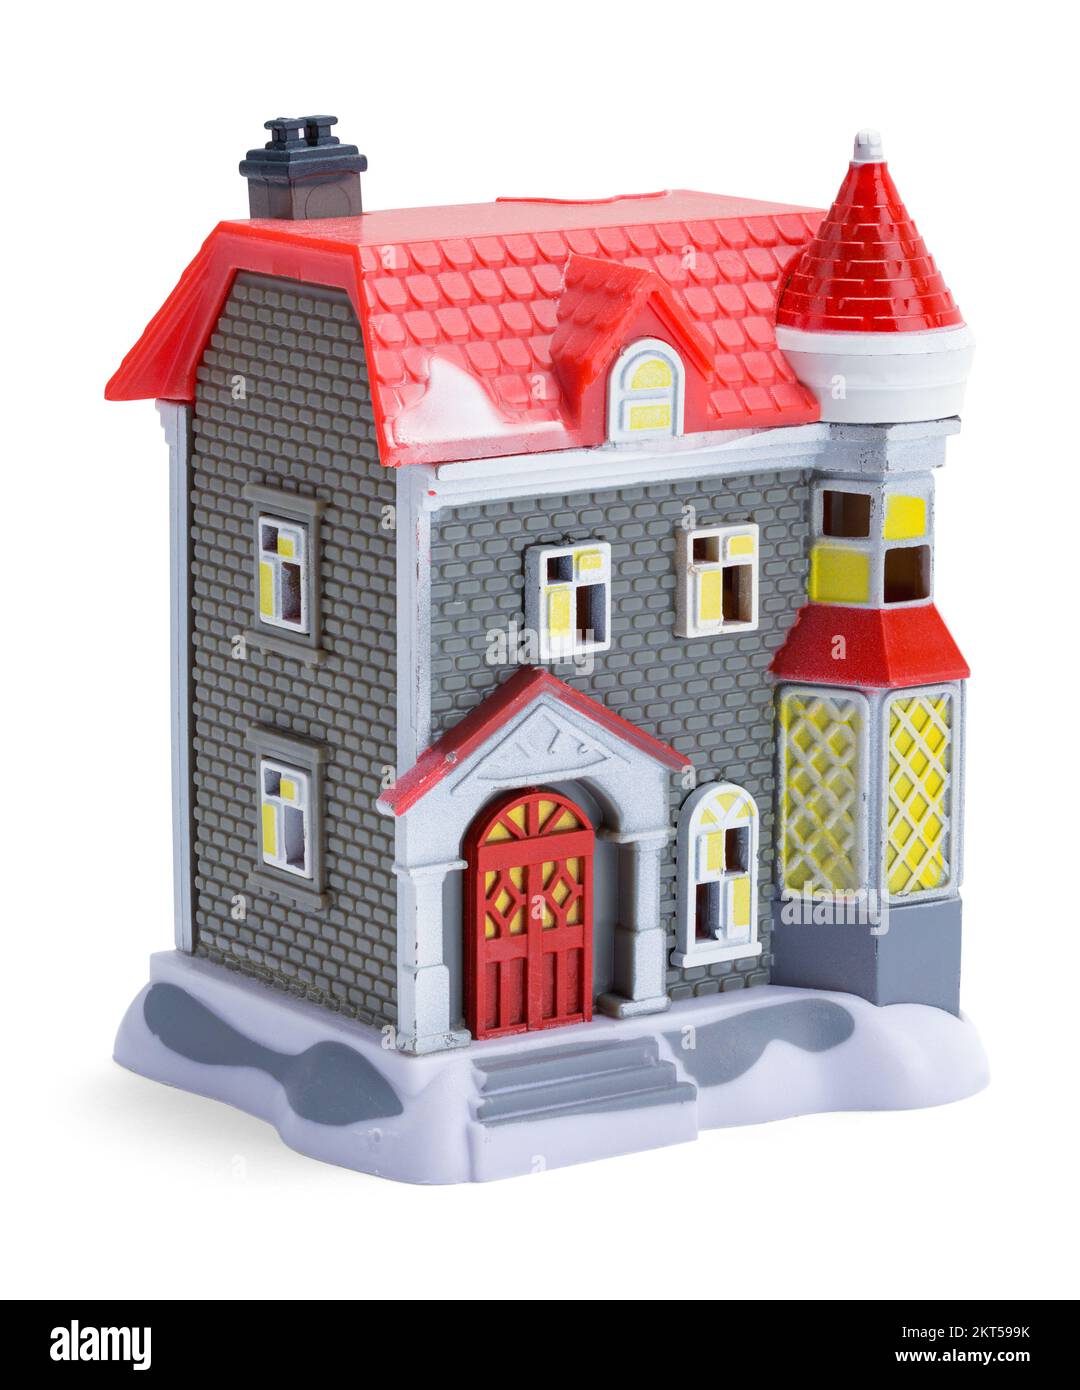 Plastic Toy Town House Model Cut Out on White. Stock Photo